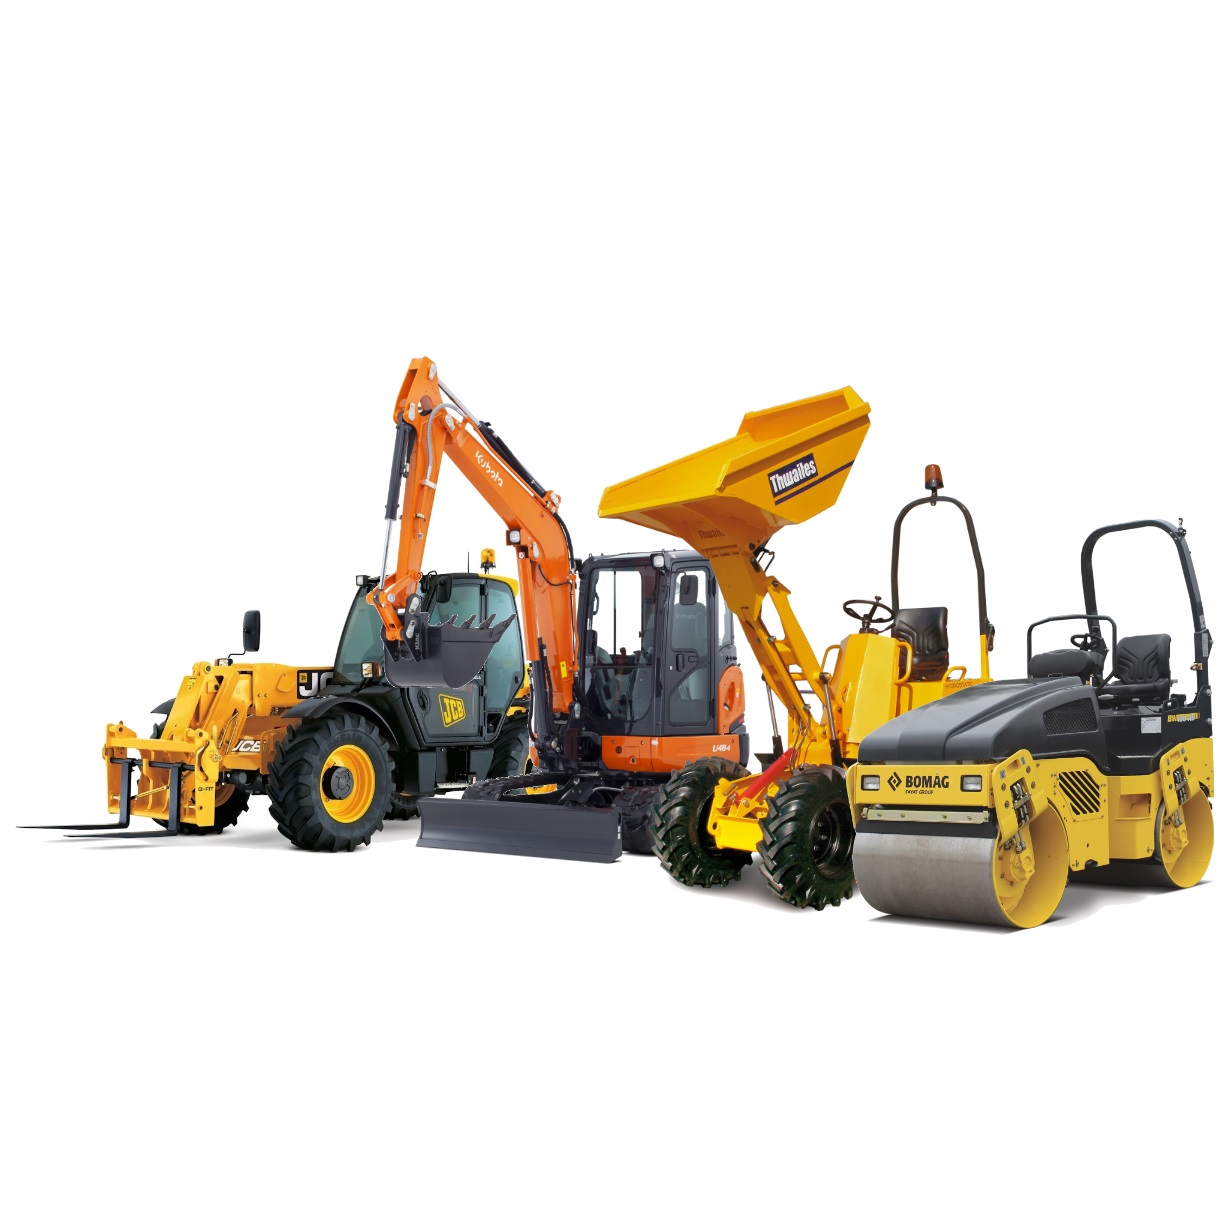 Plant Hire in Chelmsford